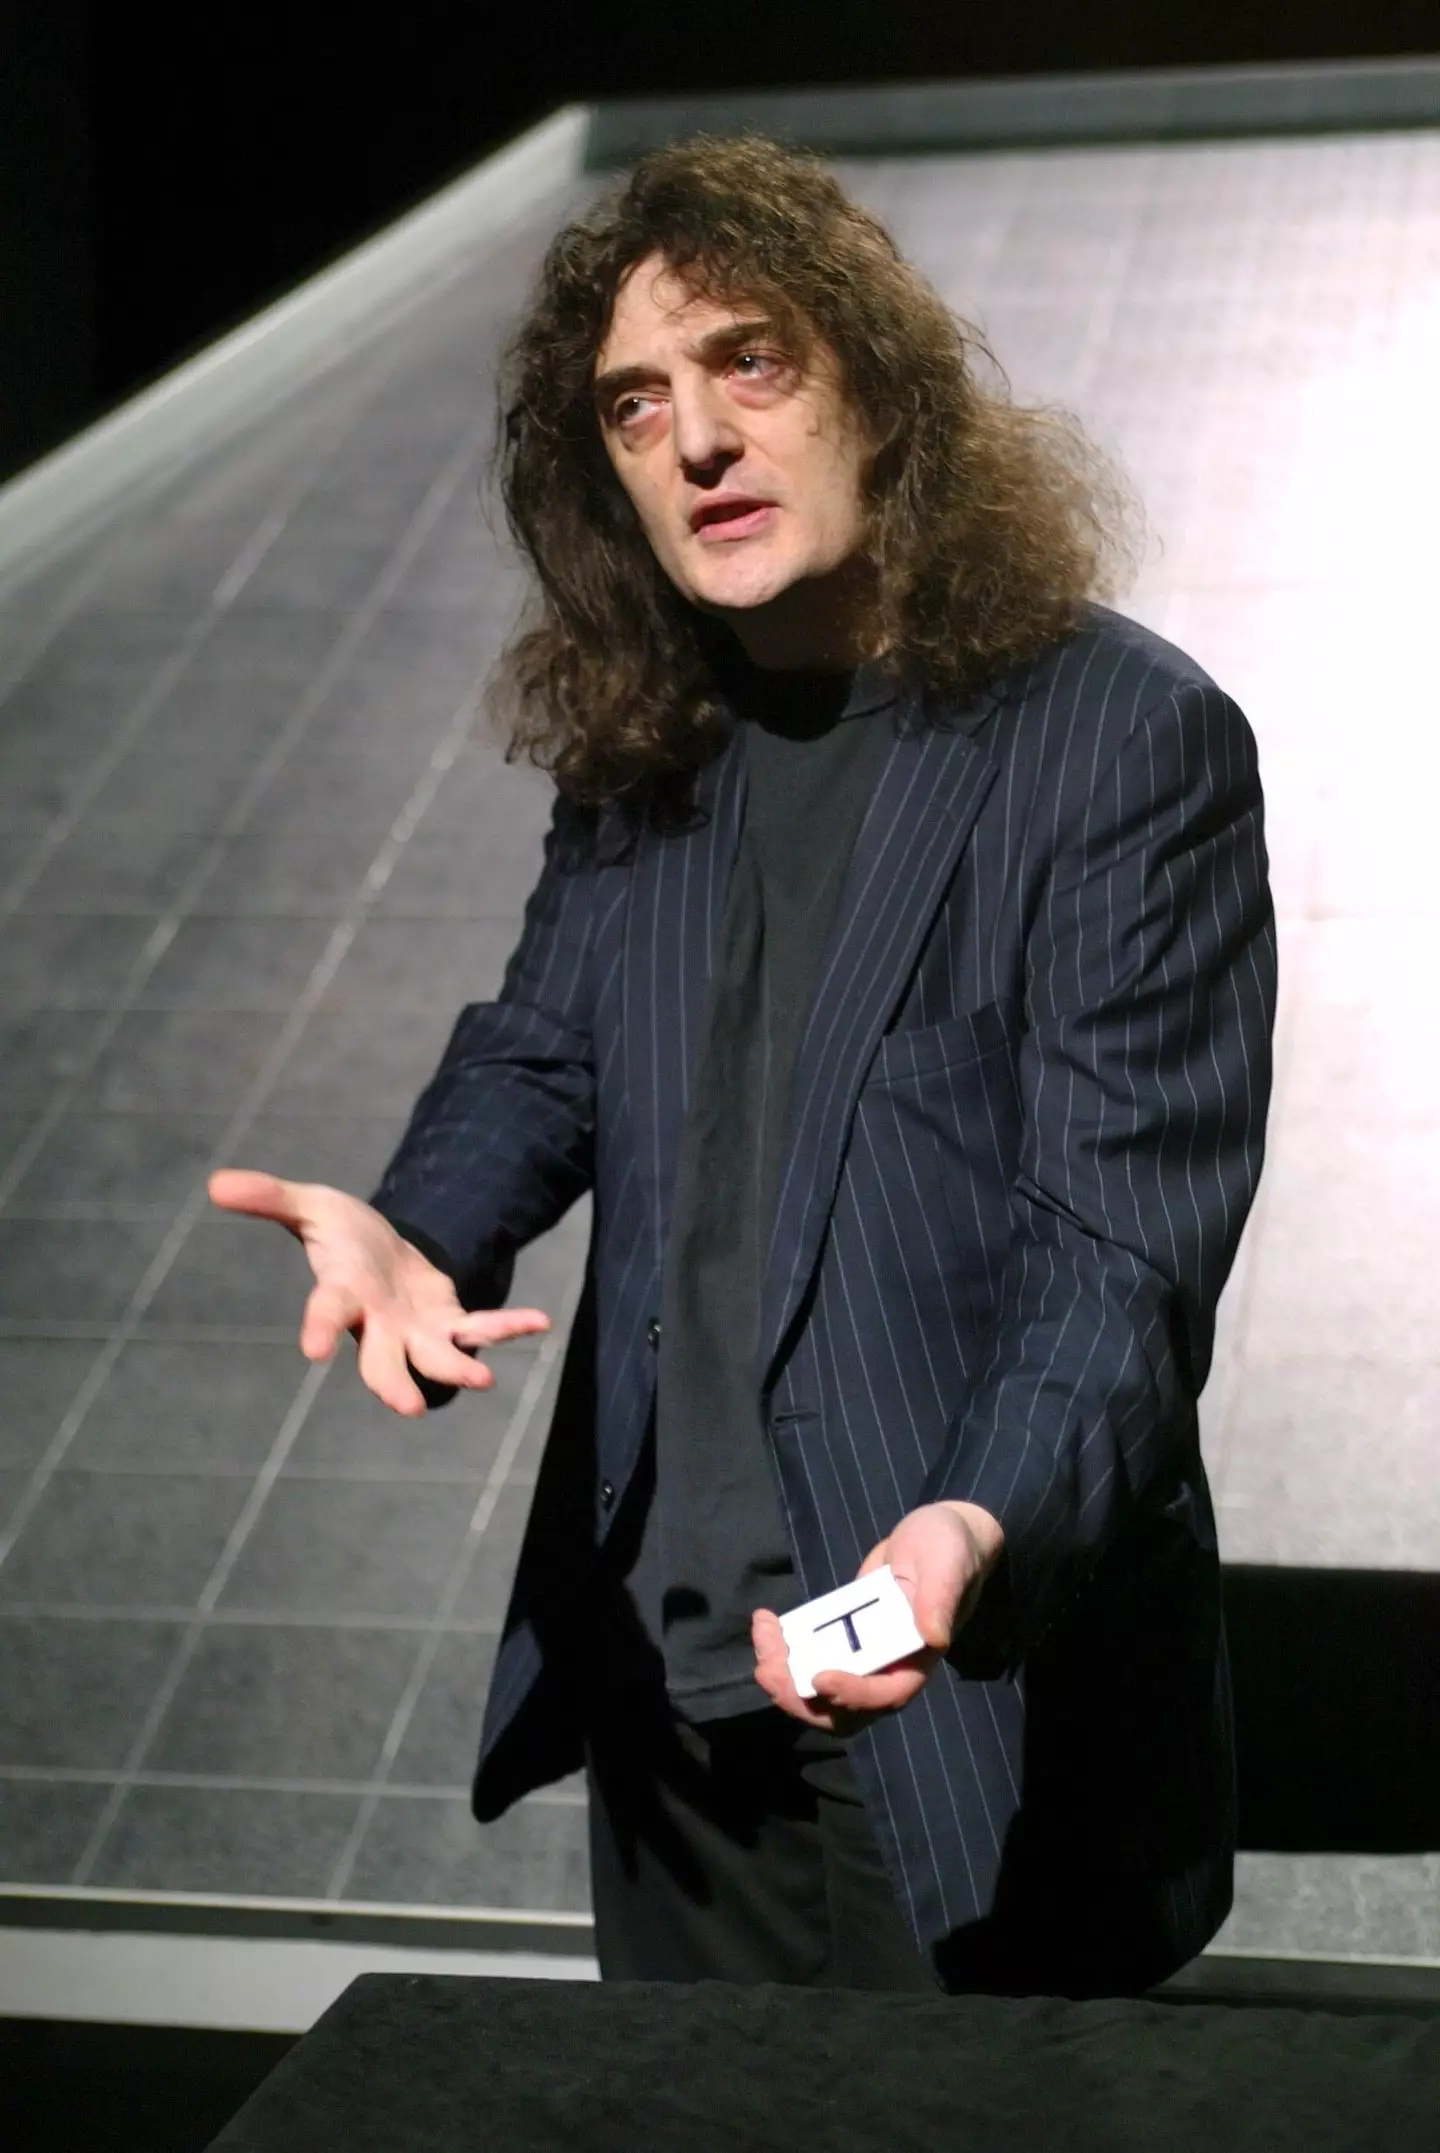 Jerry Sadowitz has responded after his second Edinburgh Fringe show was axed.